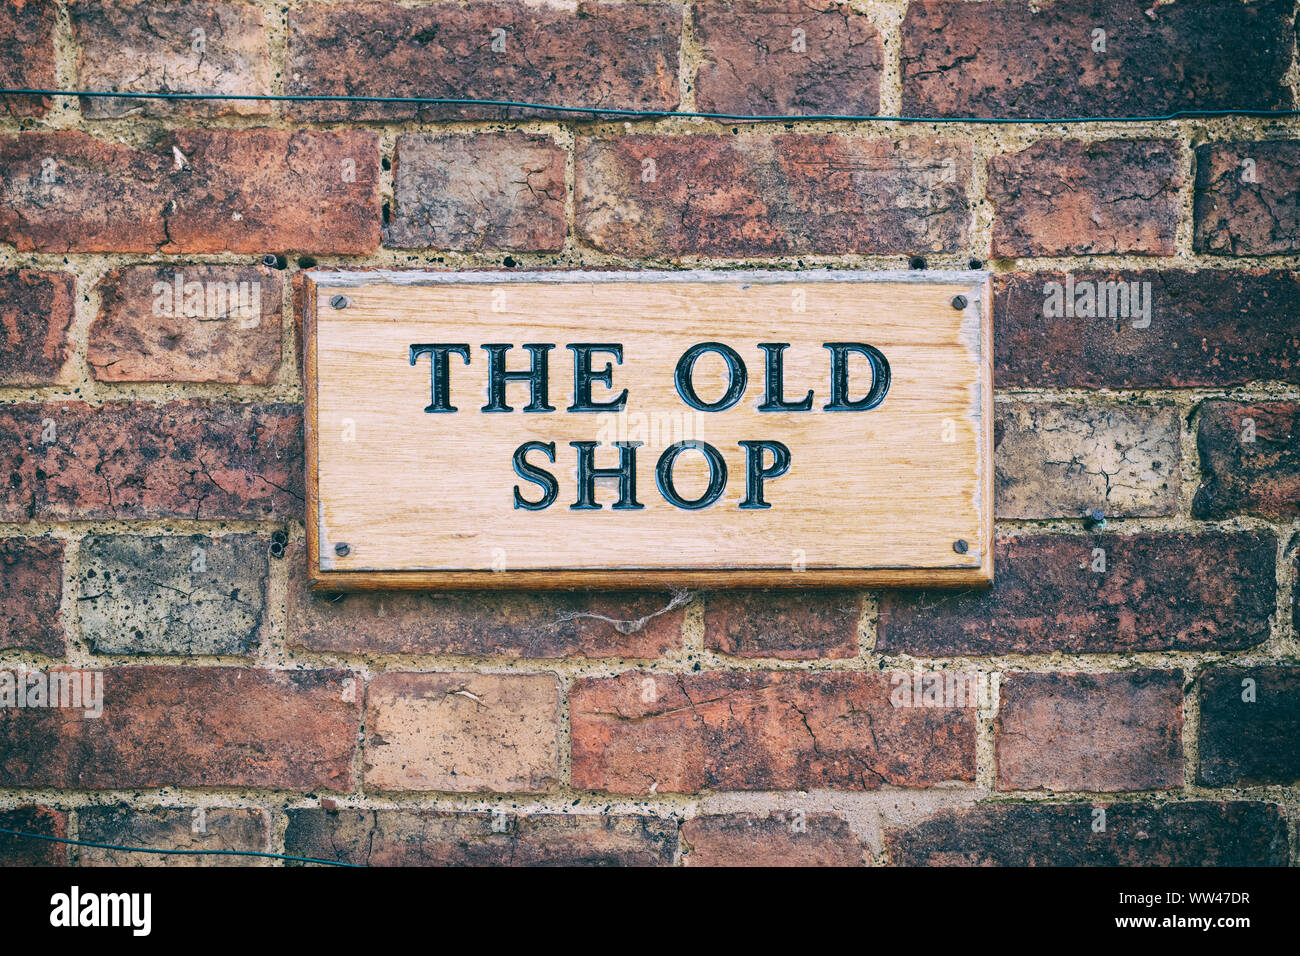 The old shop sign on a brick cottage wall. Little Comberton , Cotswolds, Wychavon district, Worcestershire, UK. Vintage filter applied Stock Photo